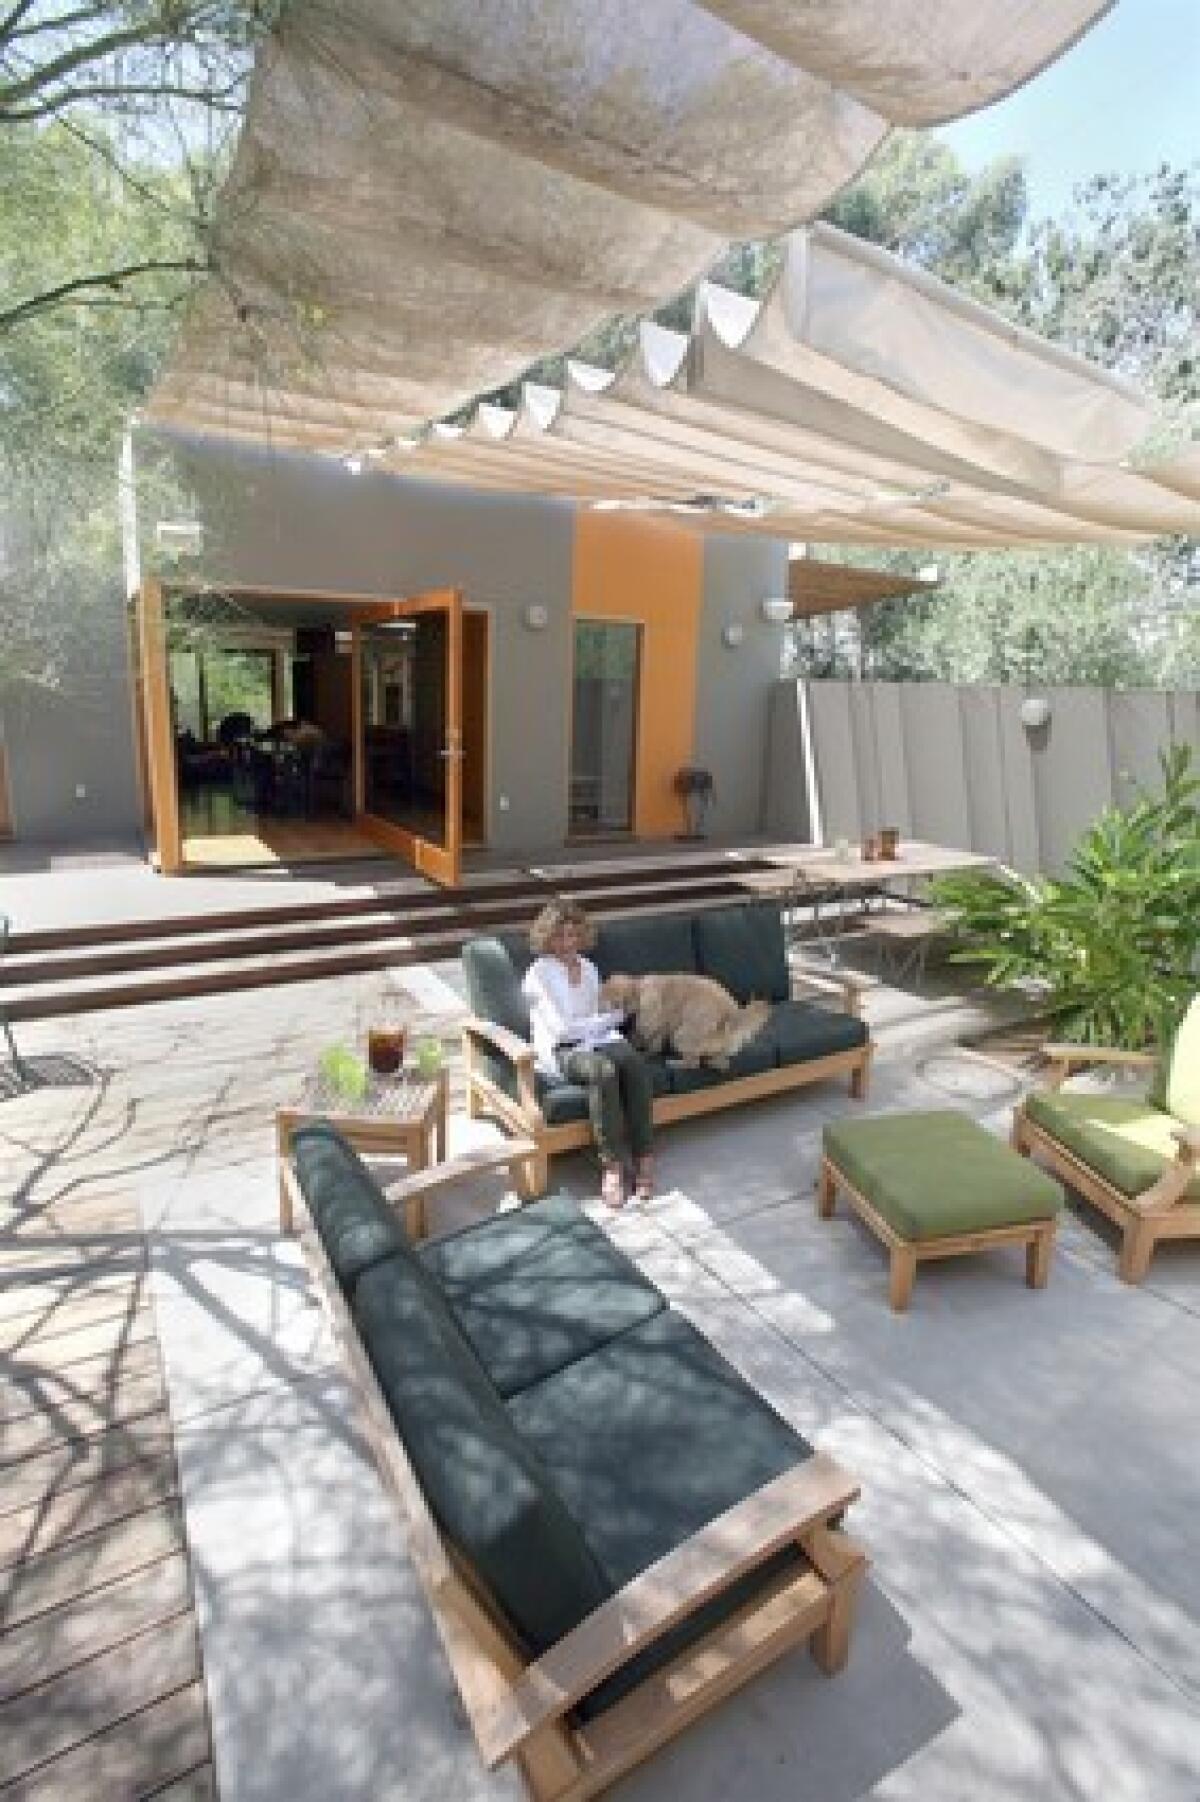 Sharon Bowman plays with her dog in her outdoor room in Los Angeles. When Bowman and husband Joe Fineman wanted to remodel their house, Culver City architect Lorcan OHerlihy suggested turning what had been the living room into an alfresco space. Ipe wood steps now lead from the house to a patio floor of concrete pavers and wood, all shaded by a retractable soft ceiling.